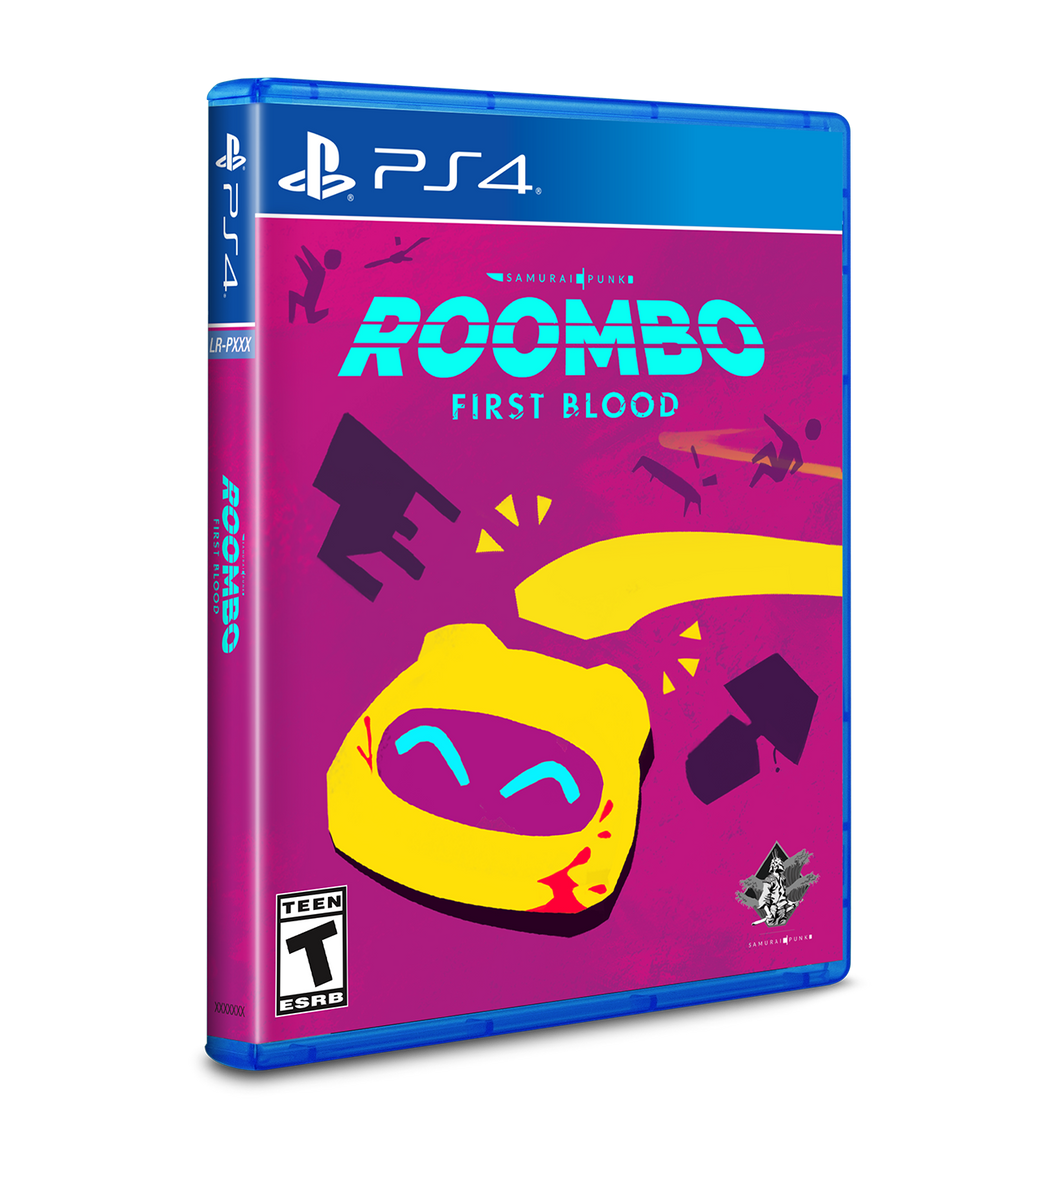 Roombo / Limited run games / PS4 / 1500 copies